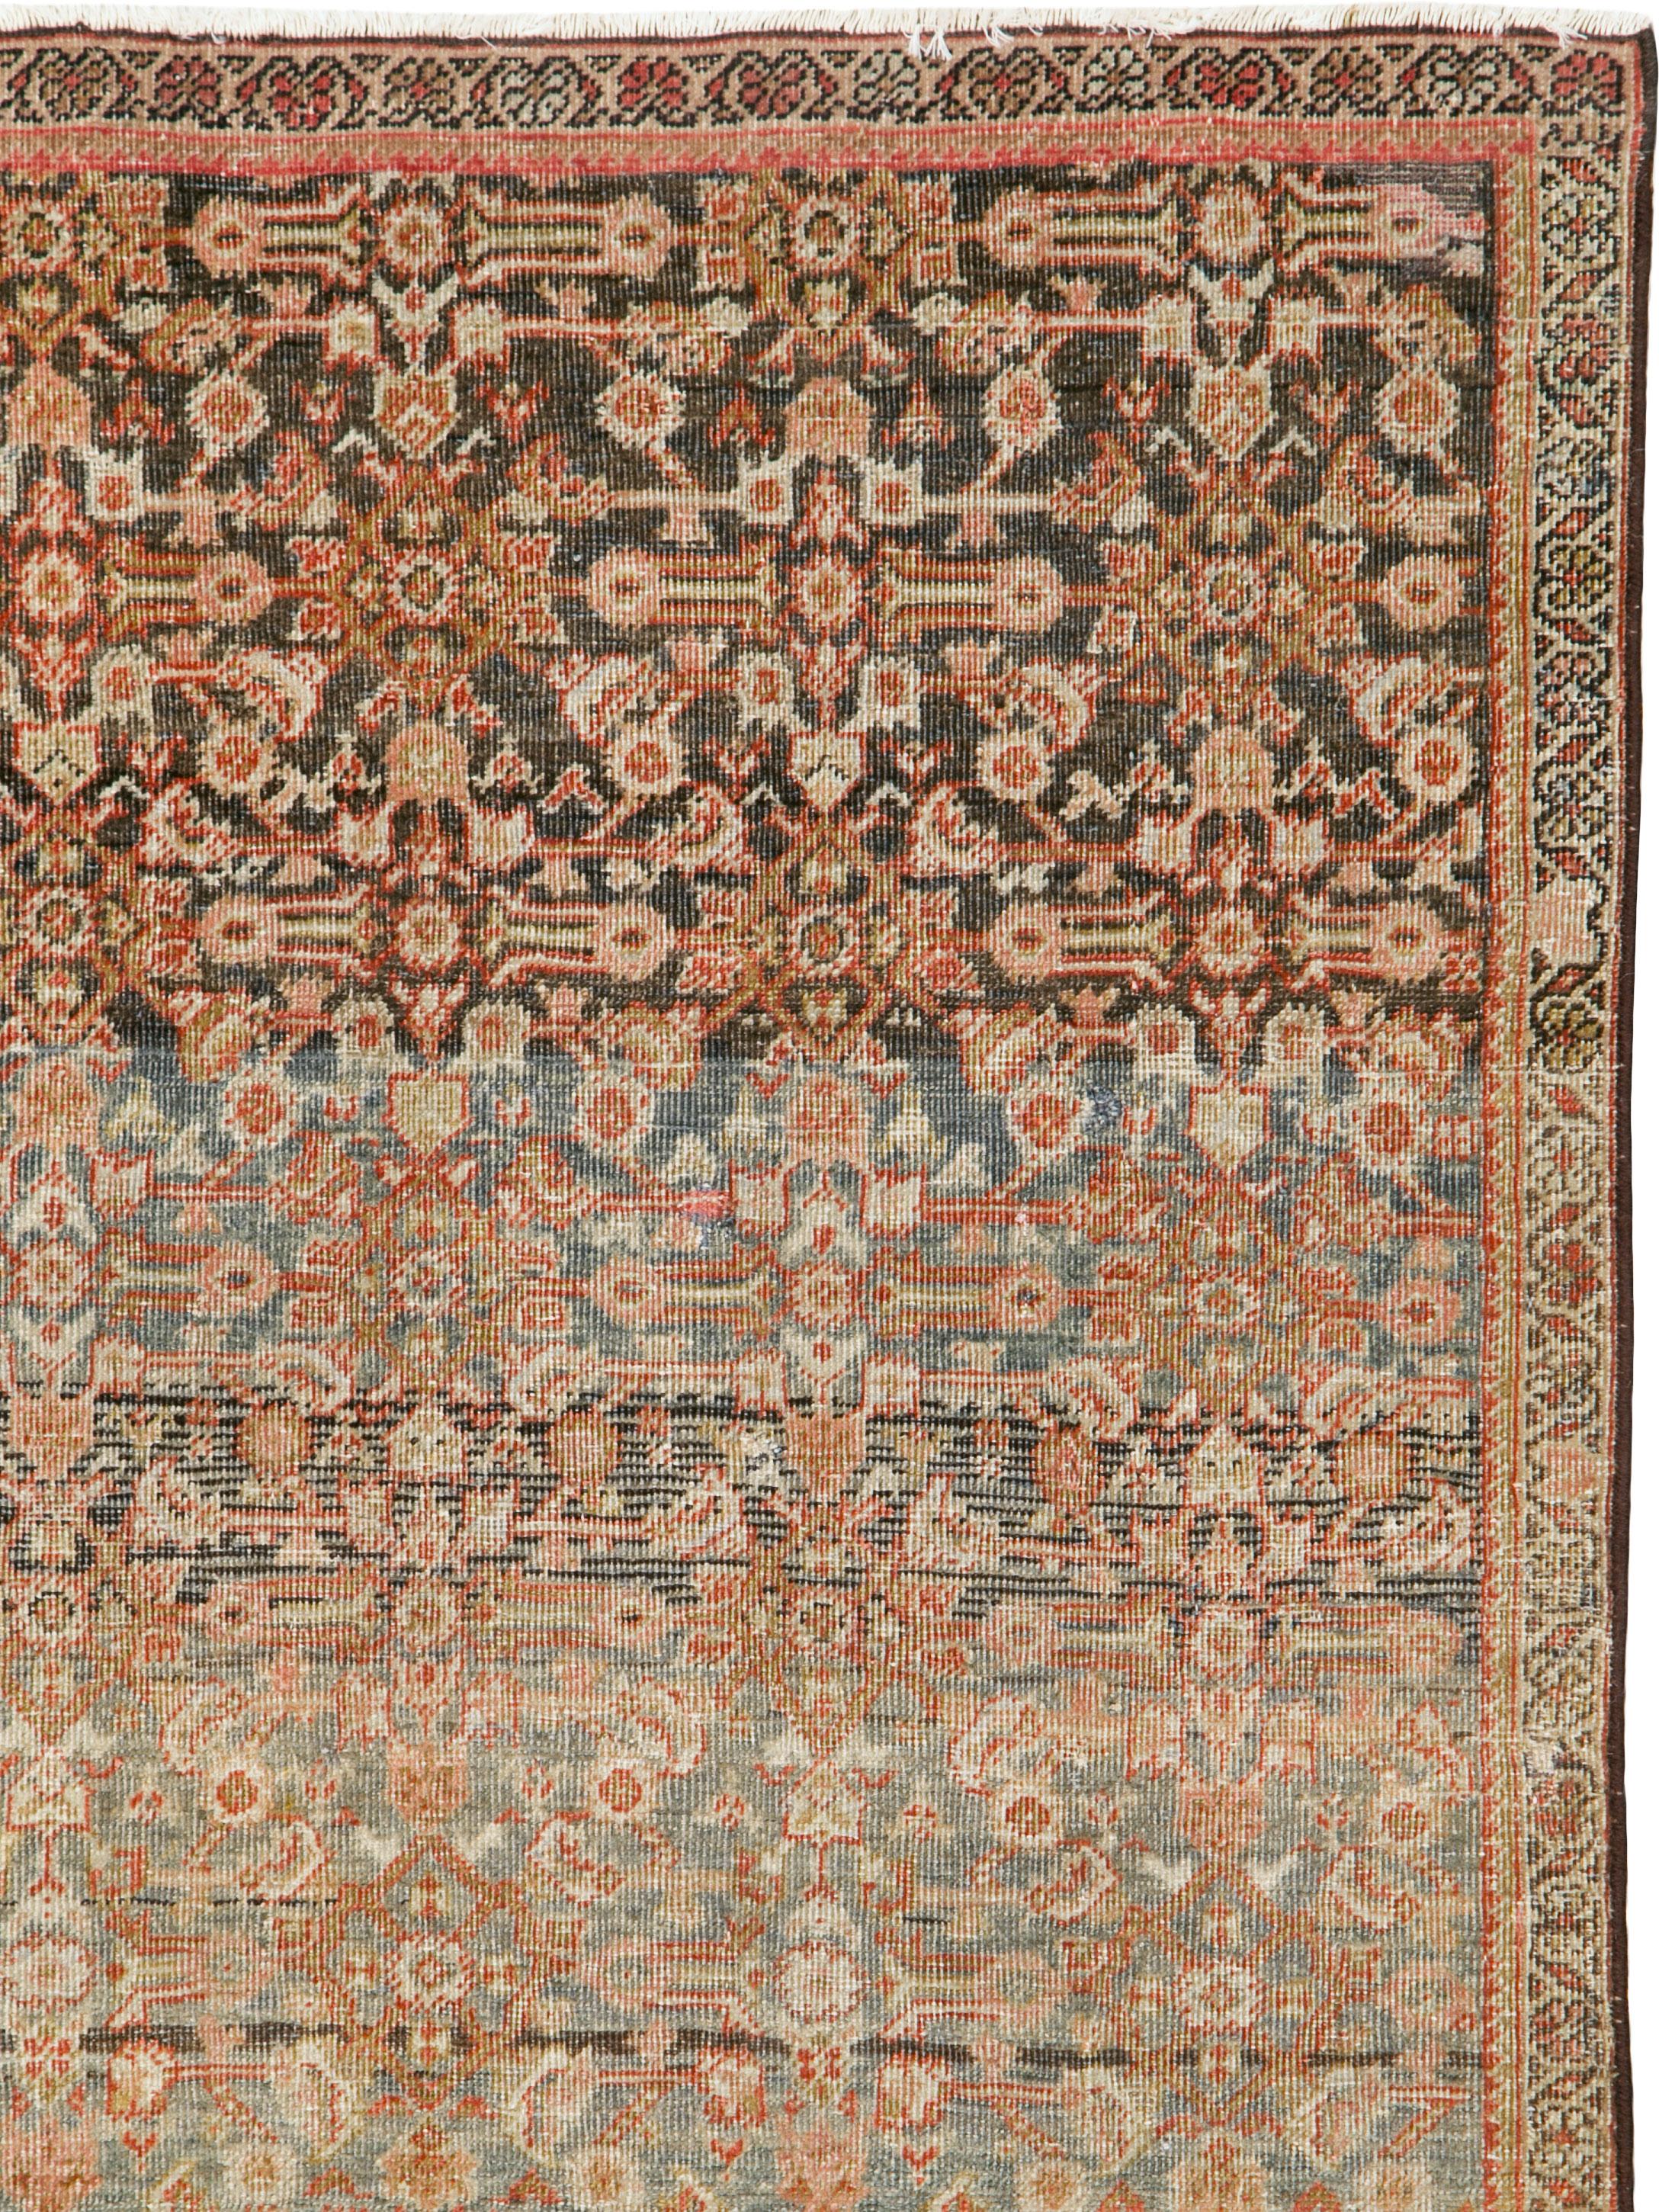 An antique Persian Fereghan rug from the late 19th century. Narrow ivory reversing fan palmette border discreetly frames the well-abrashed (natural color striation) slate field which is very closely covered by a balanced all-over Herati pattern